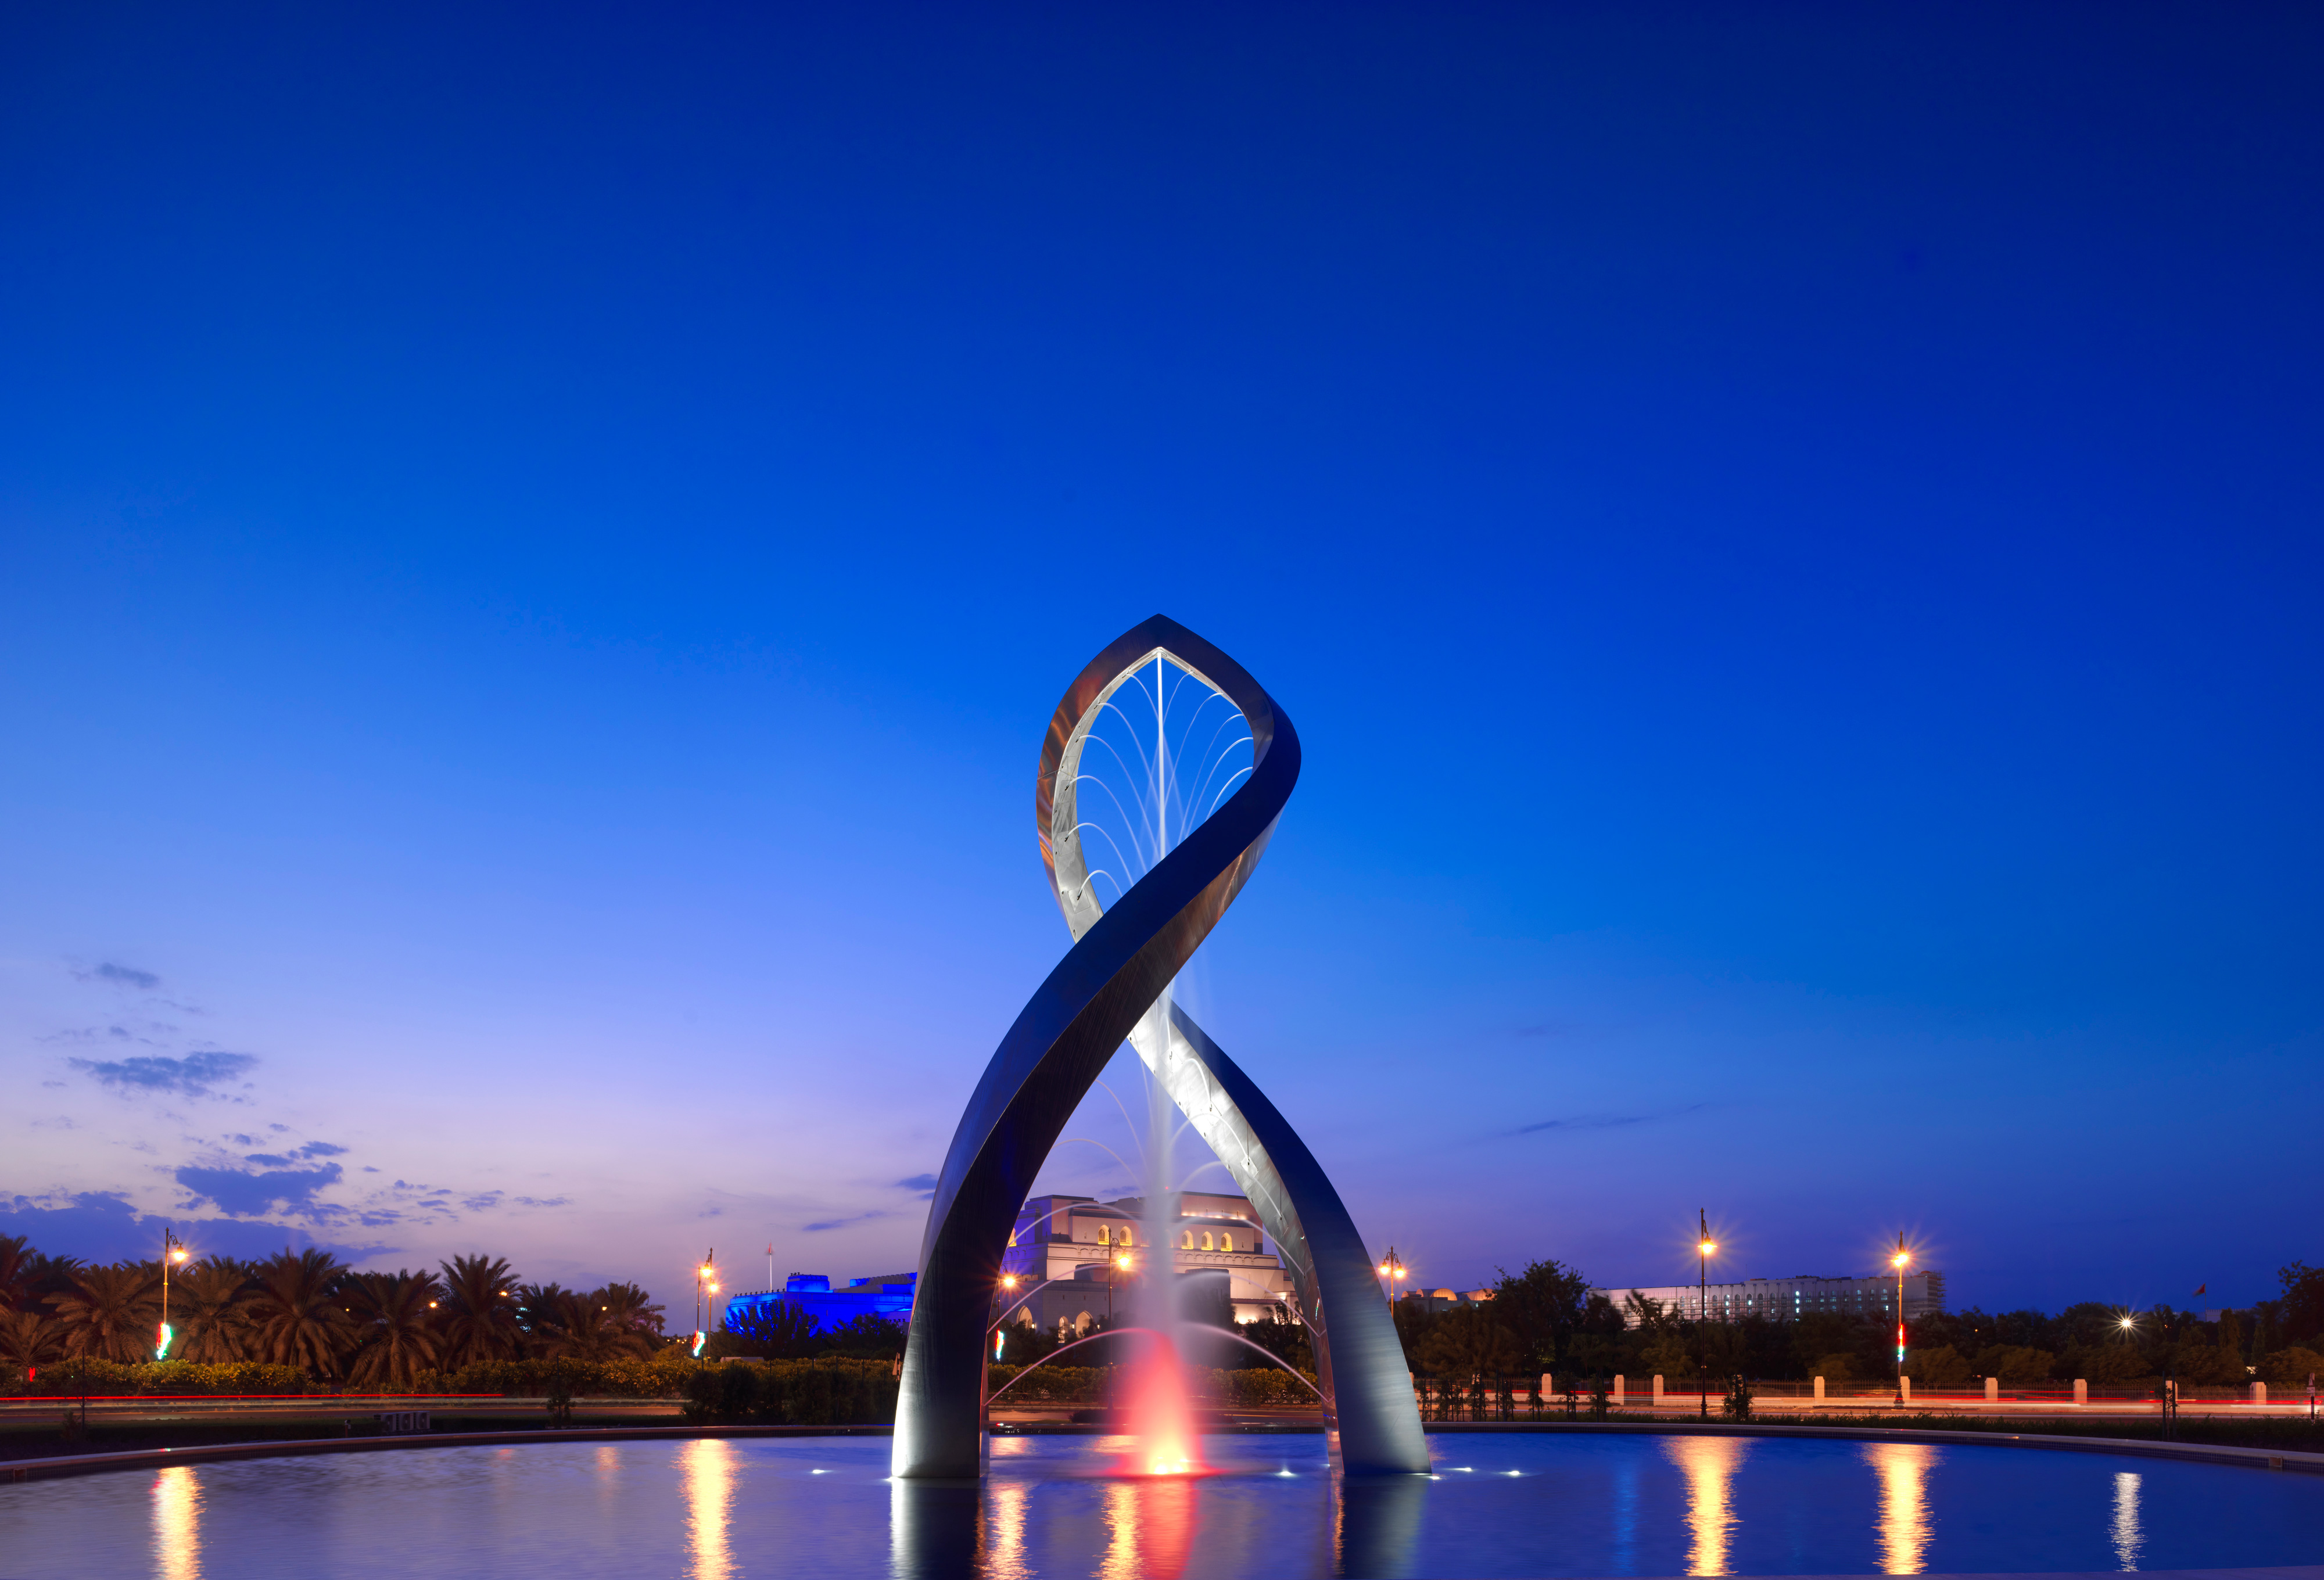 In pictures: Arches Fountain adds to Muscat beauty